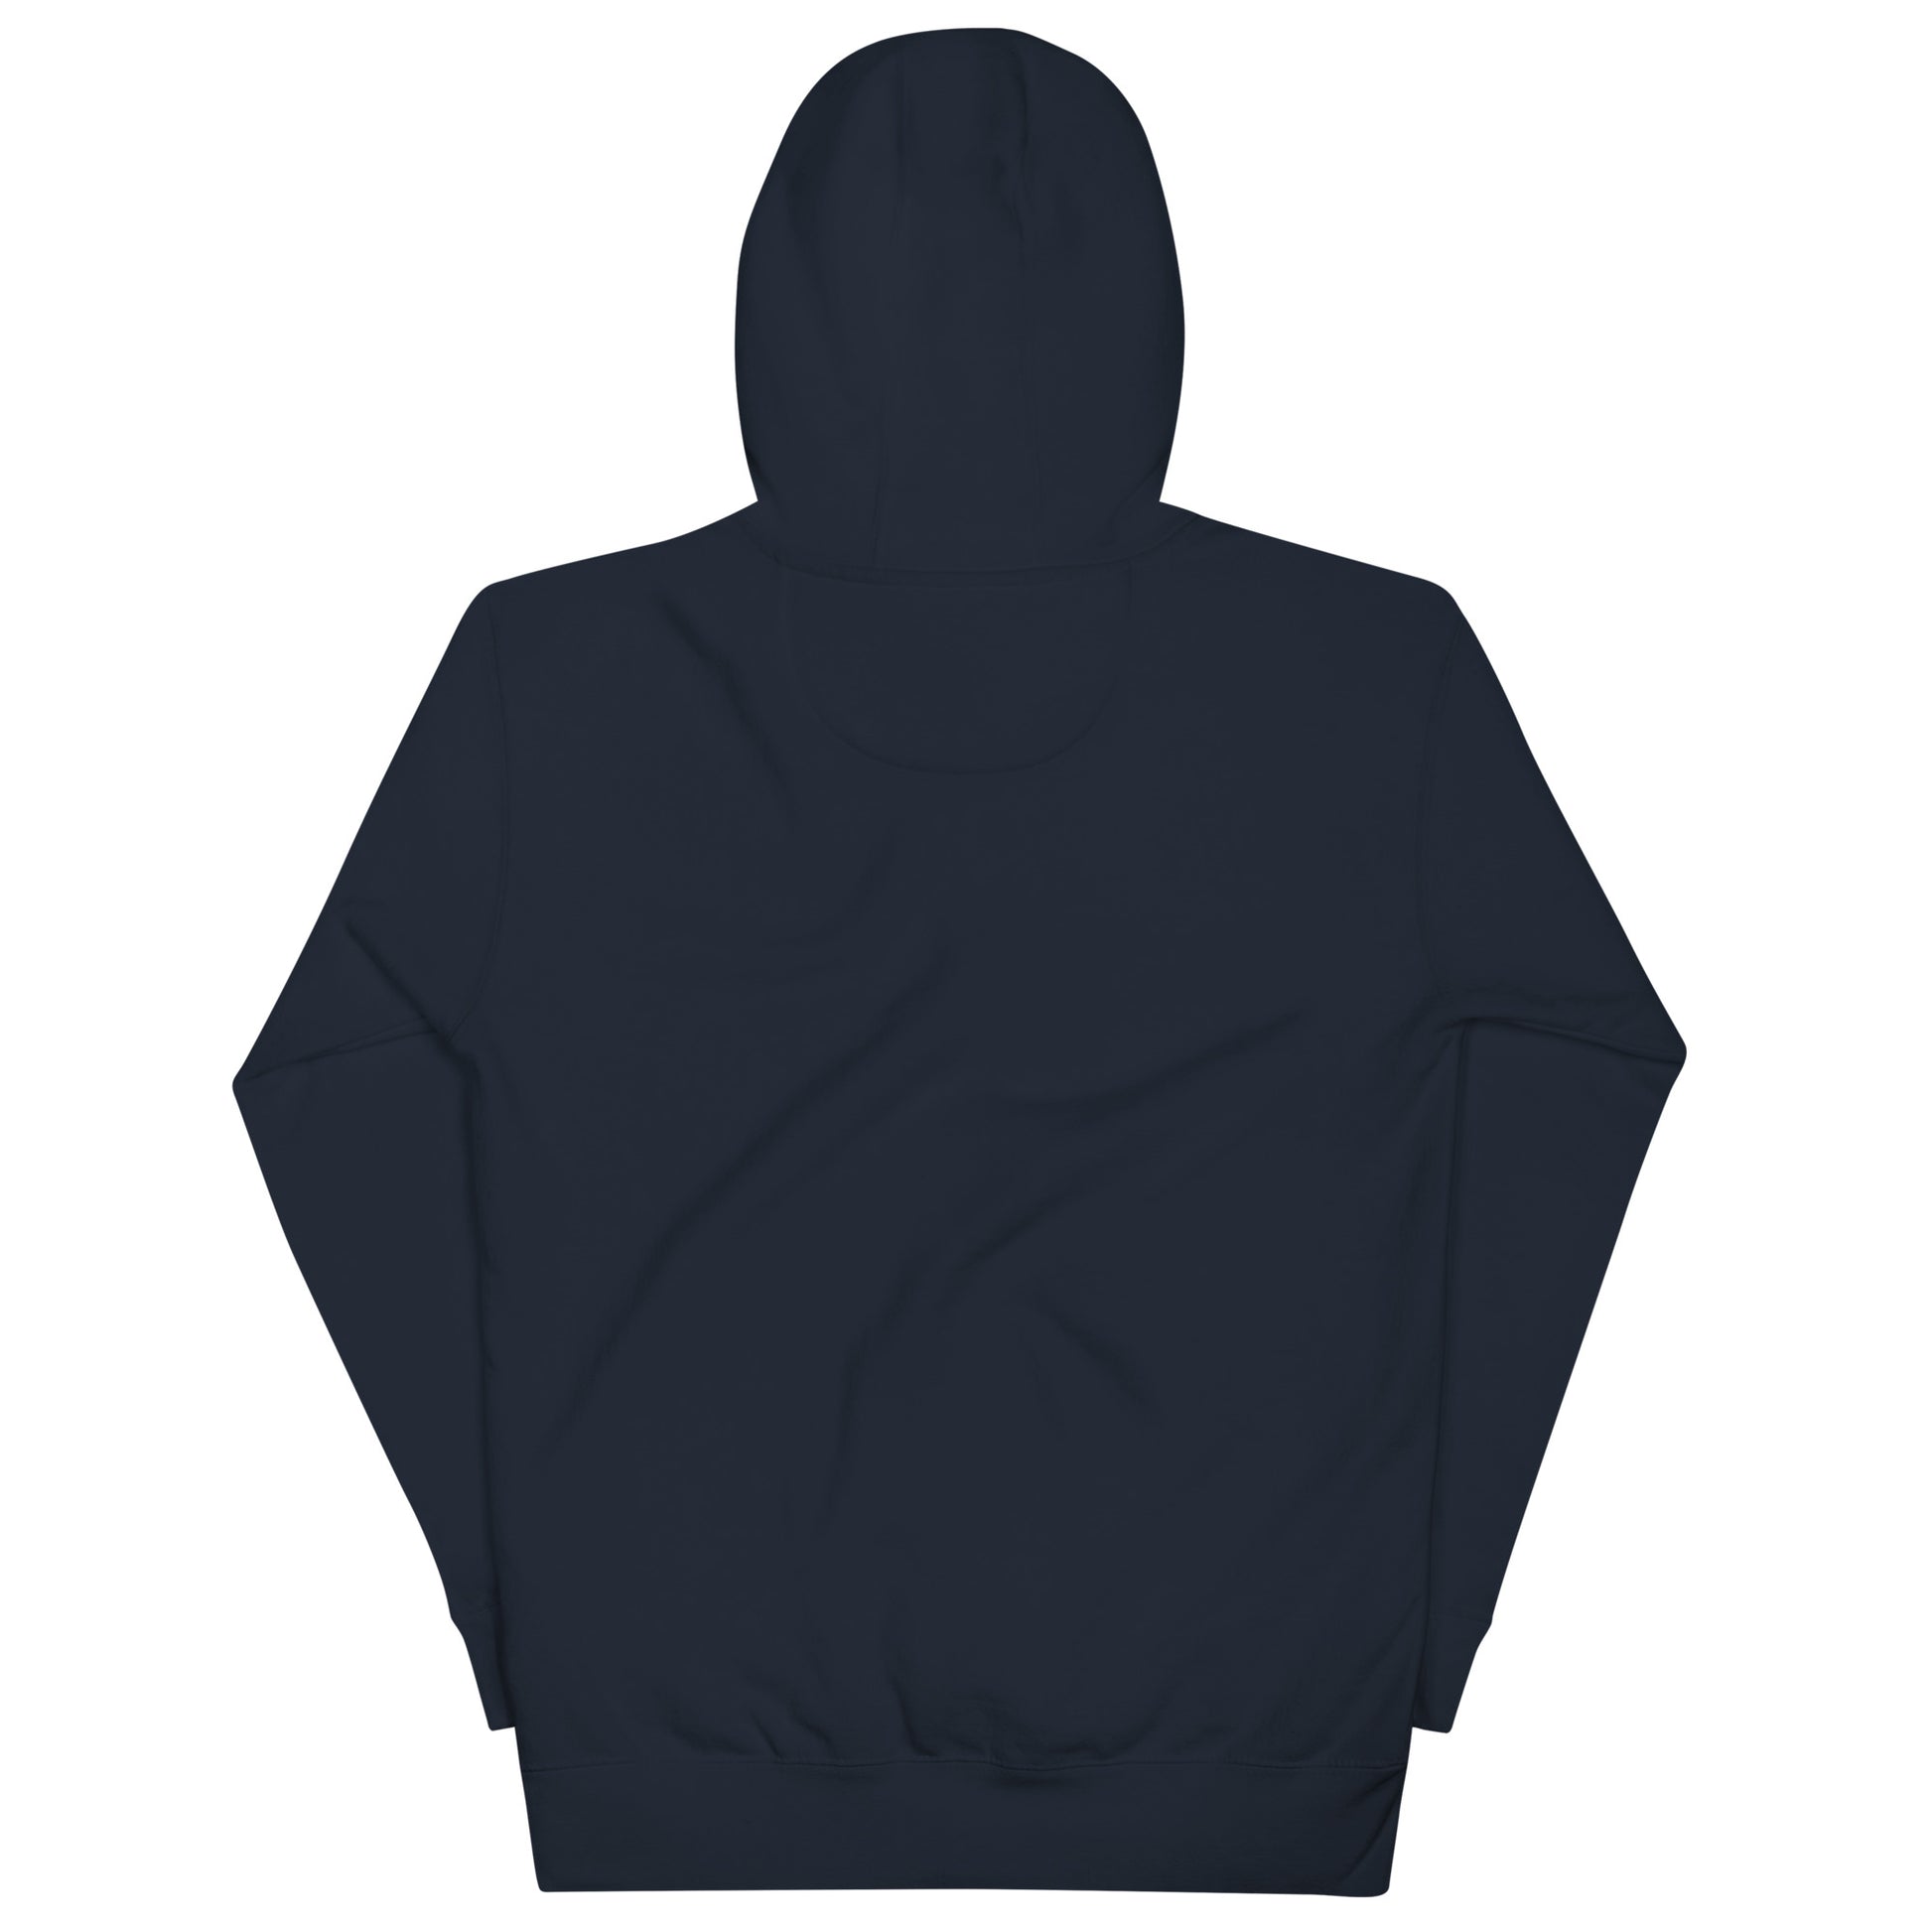 back hoodie Logo navy by B.Different Clothing independent streetwear brand inspired by street art graffiti